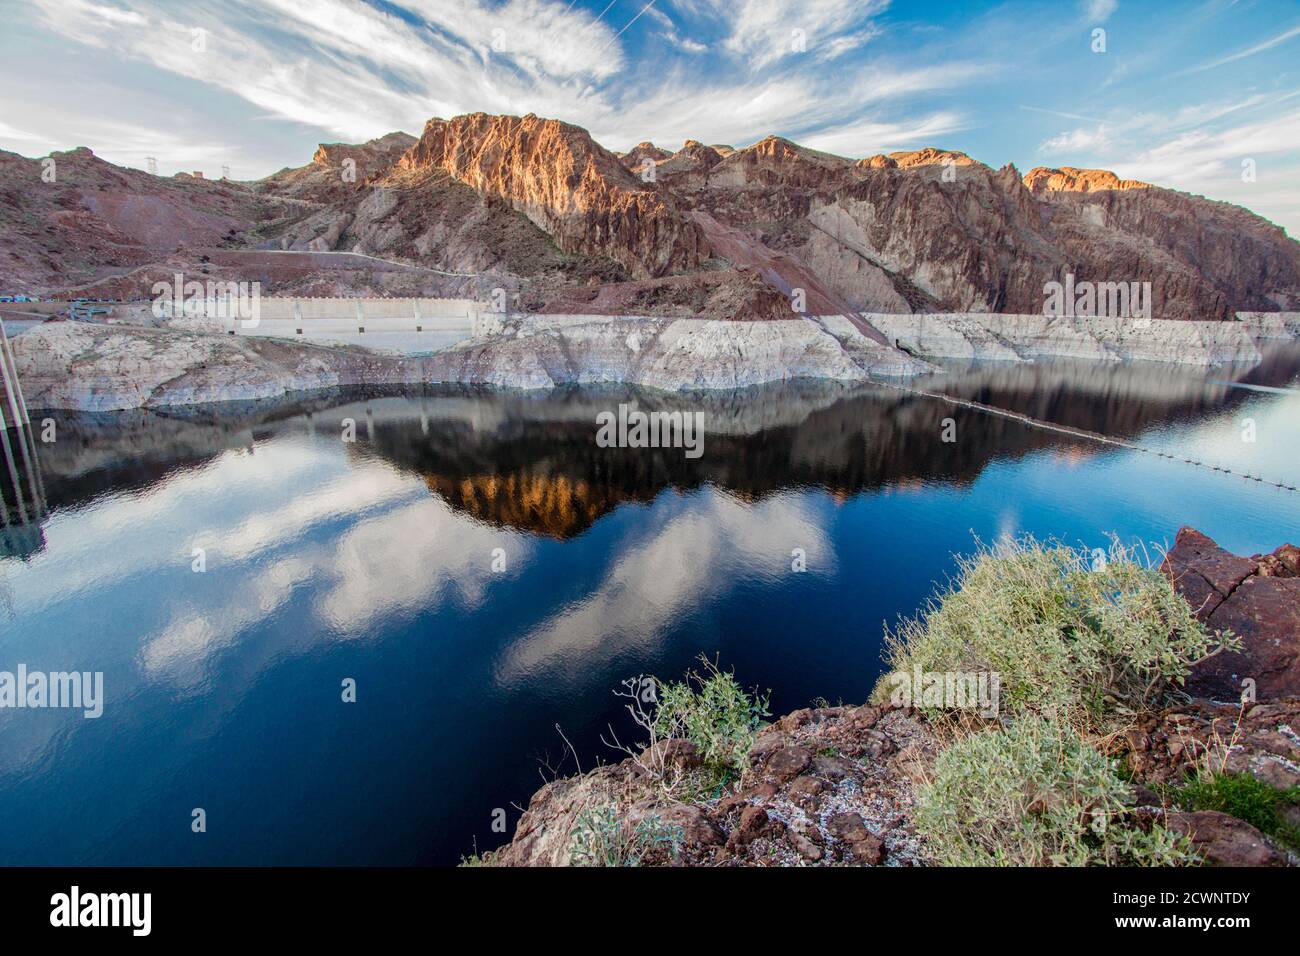 Lake Mead Overlook. Mountain reflection in the clear blue waters of Lake Mead at the Lake Mead National Recreation Area in Nevada. Stock Photo